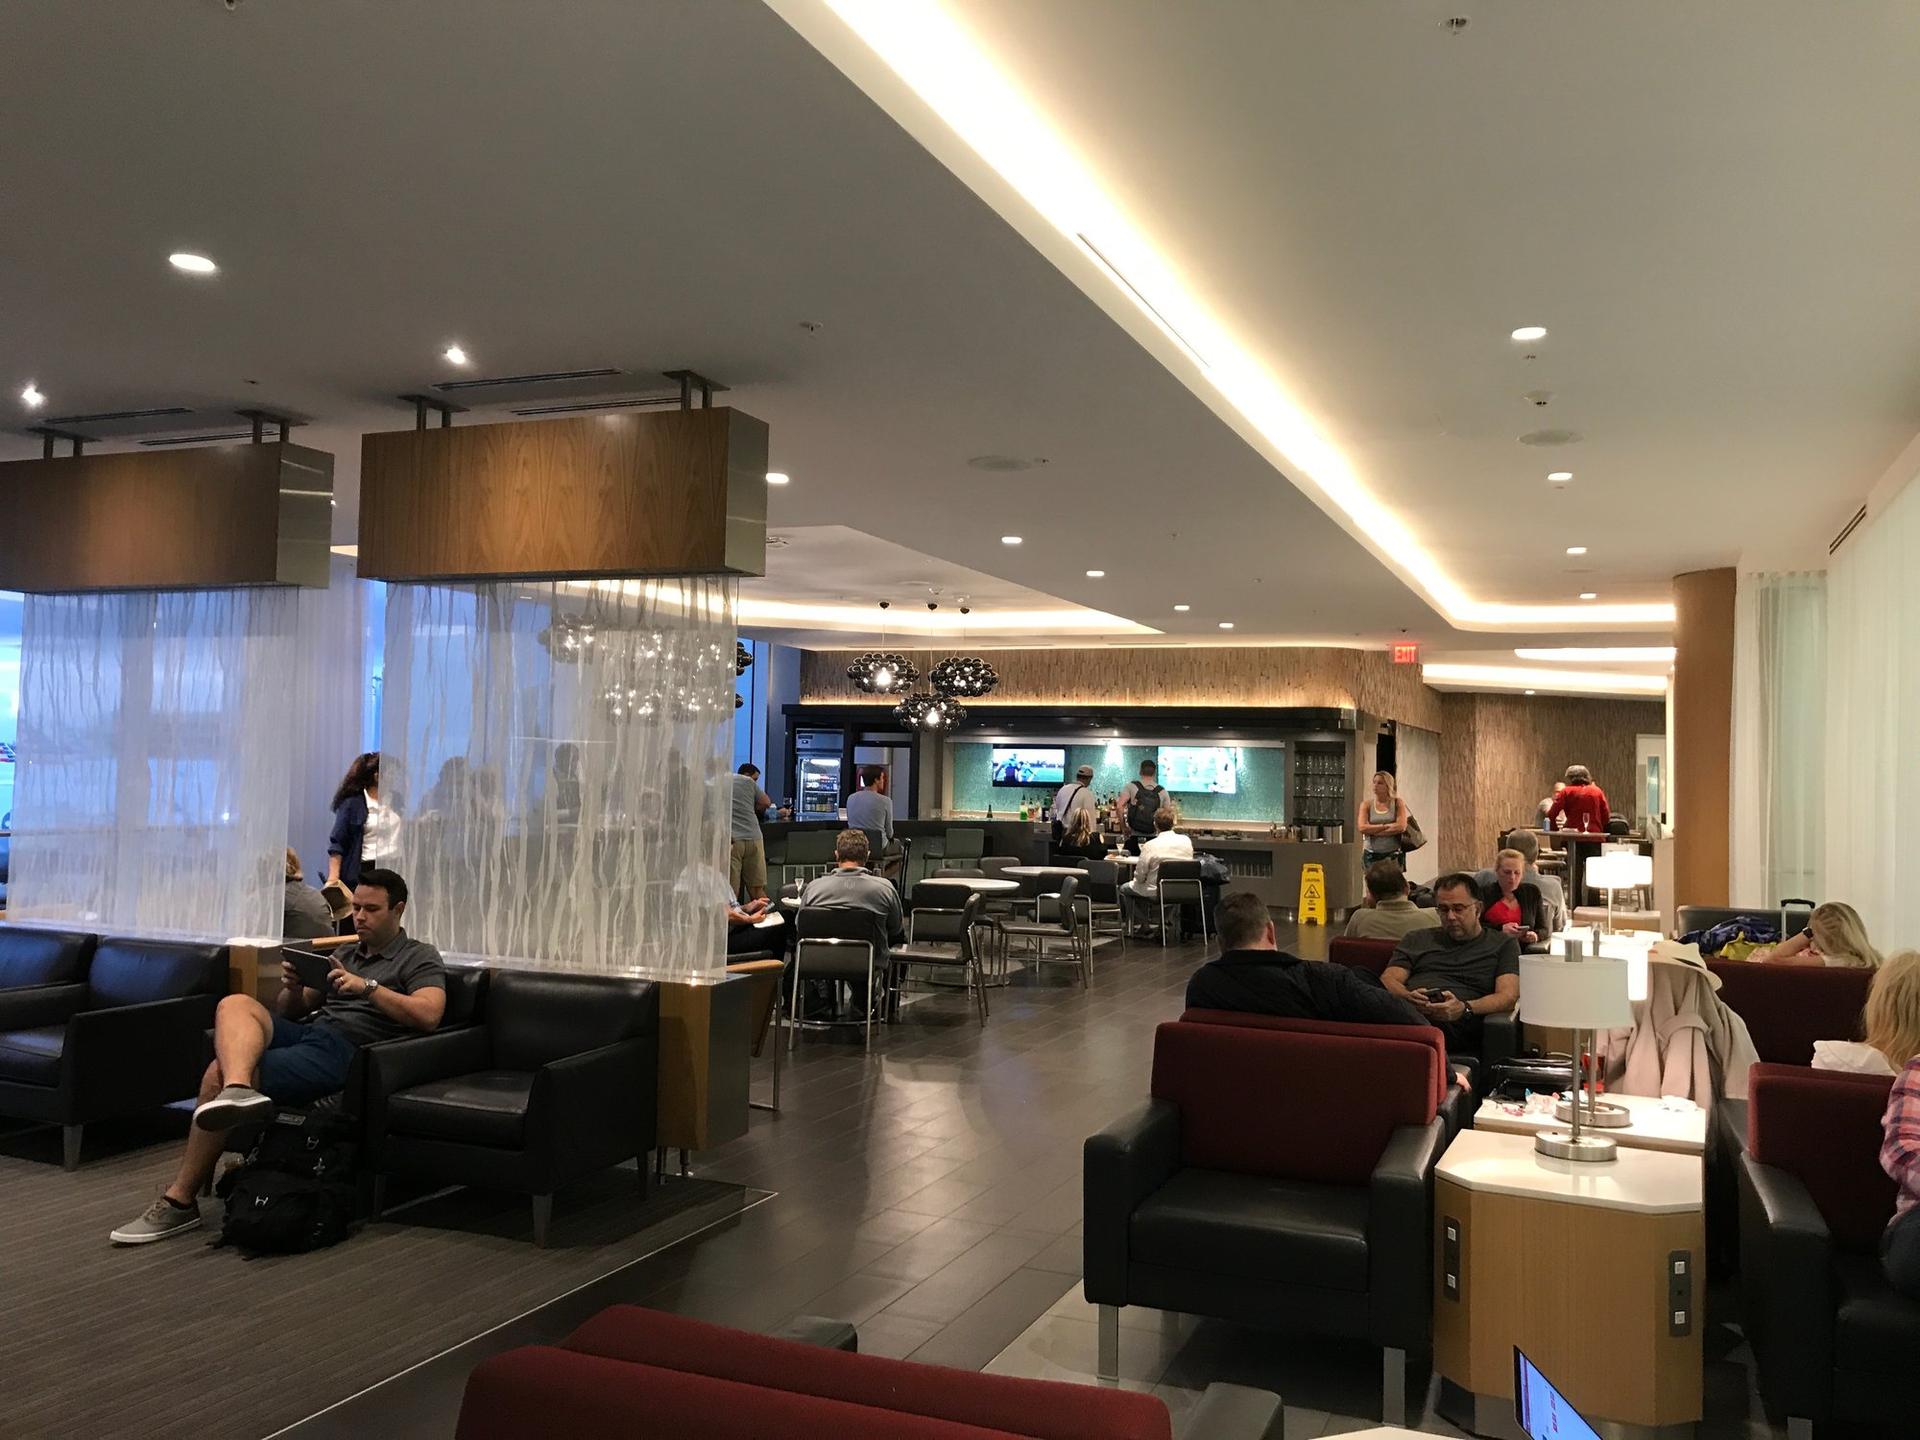 American Airlines Flagship Lounge image 65 of 65